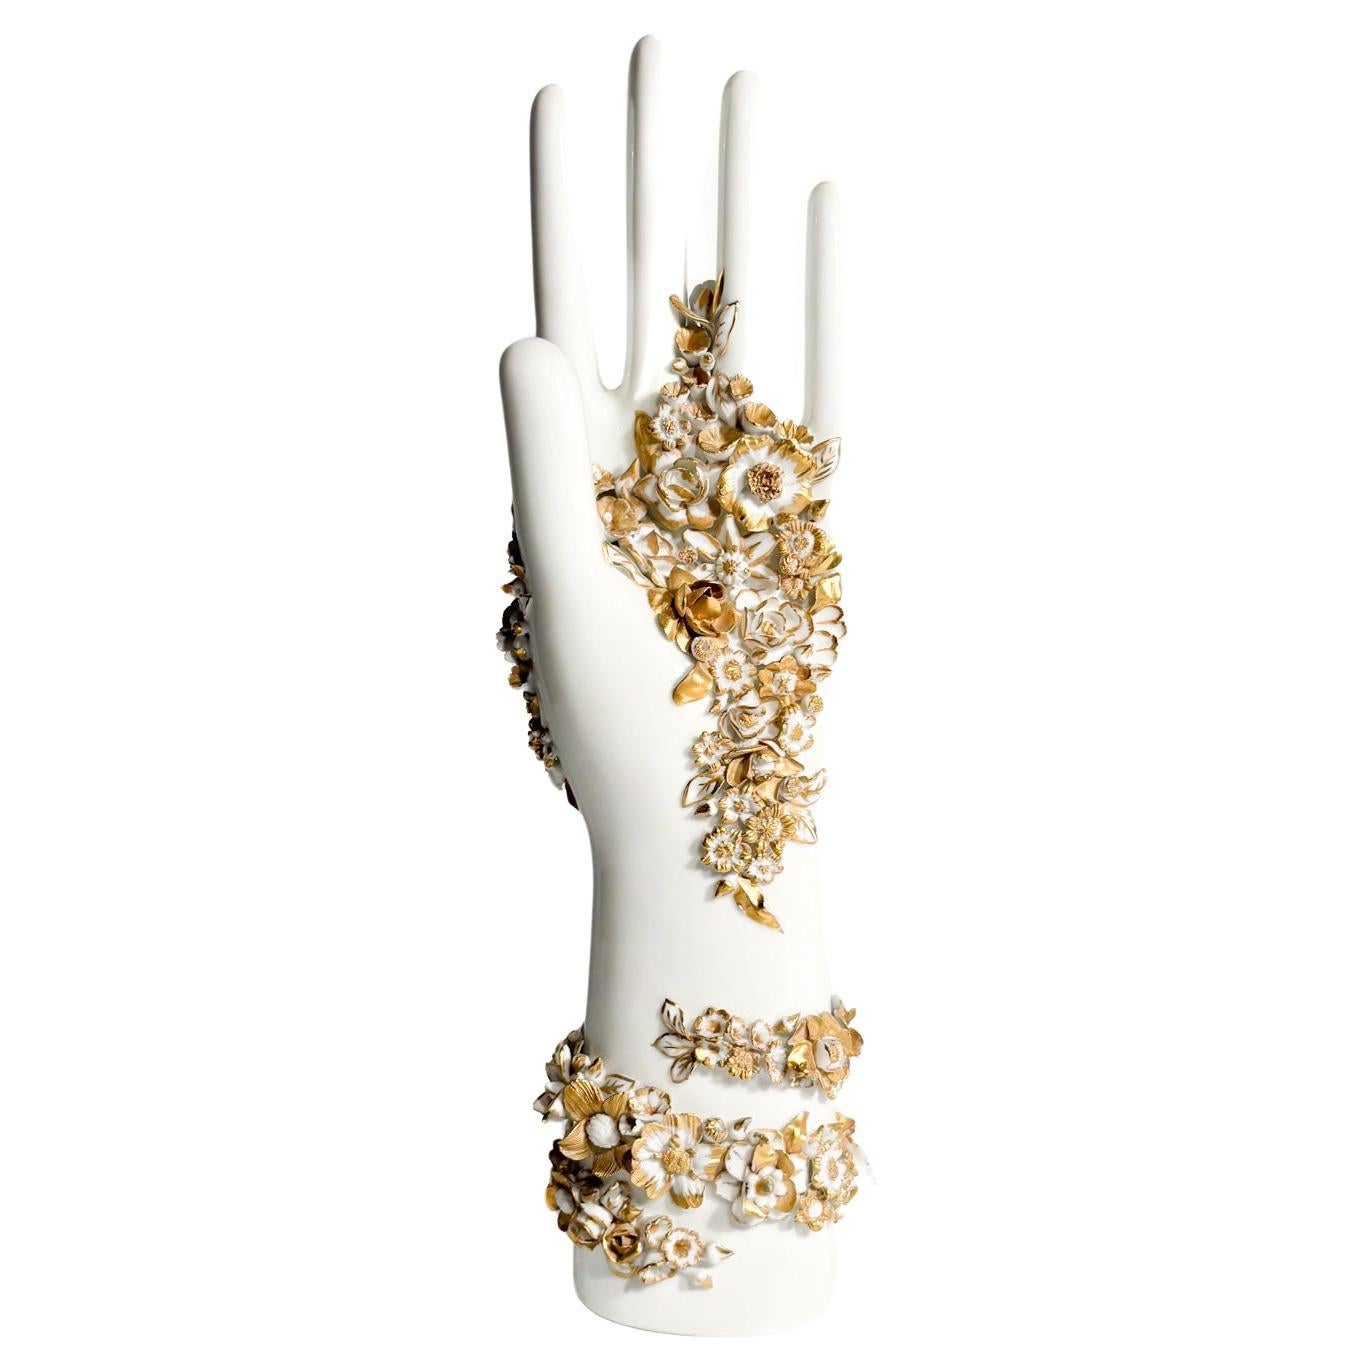 Ponti White and Gold Flowered Hand Art by Gio Ponti for Richard Ginori 1980s For Sale